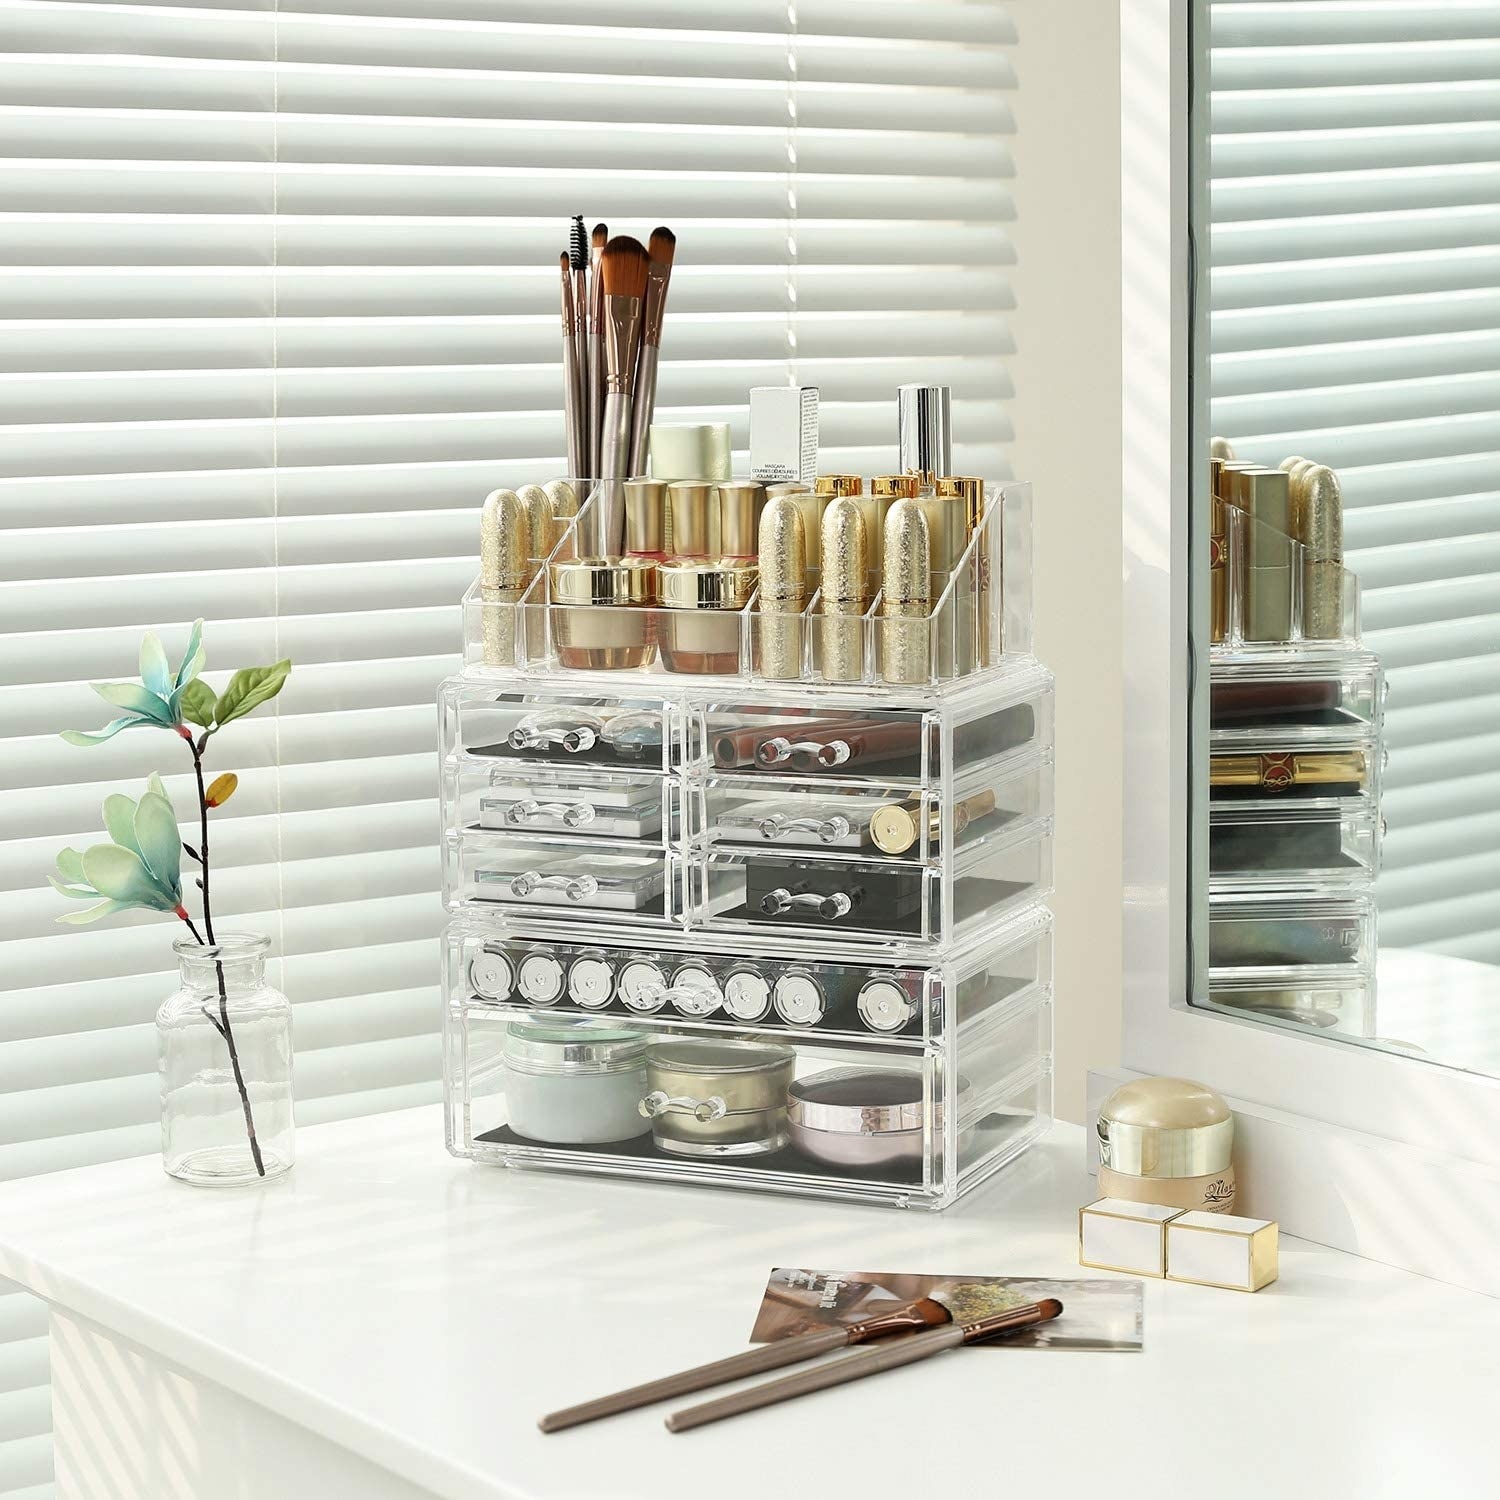 Several products inside the display on a vanity